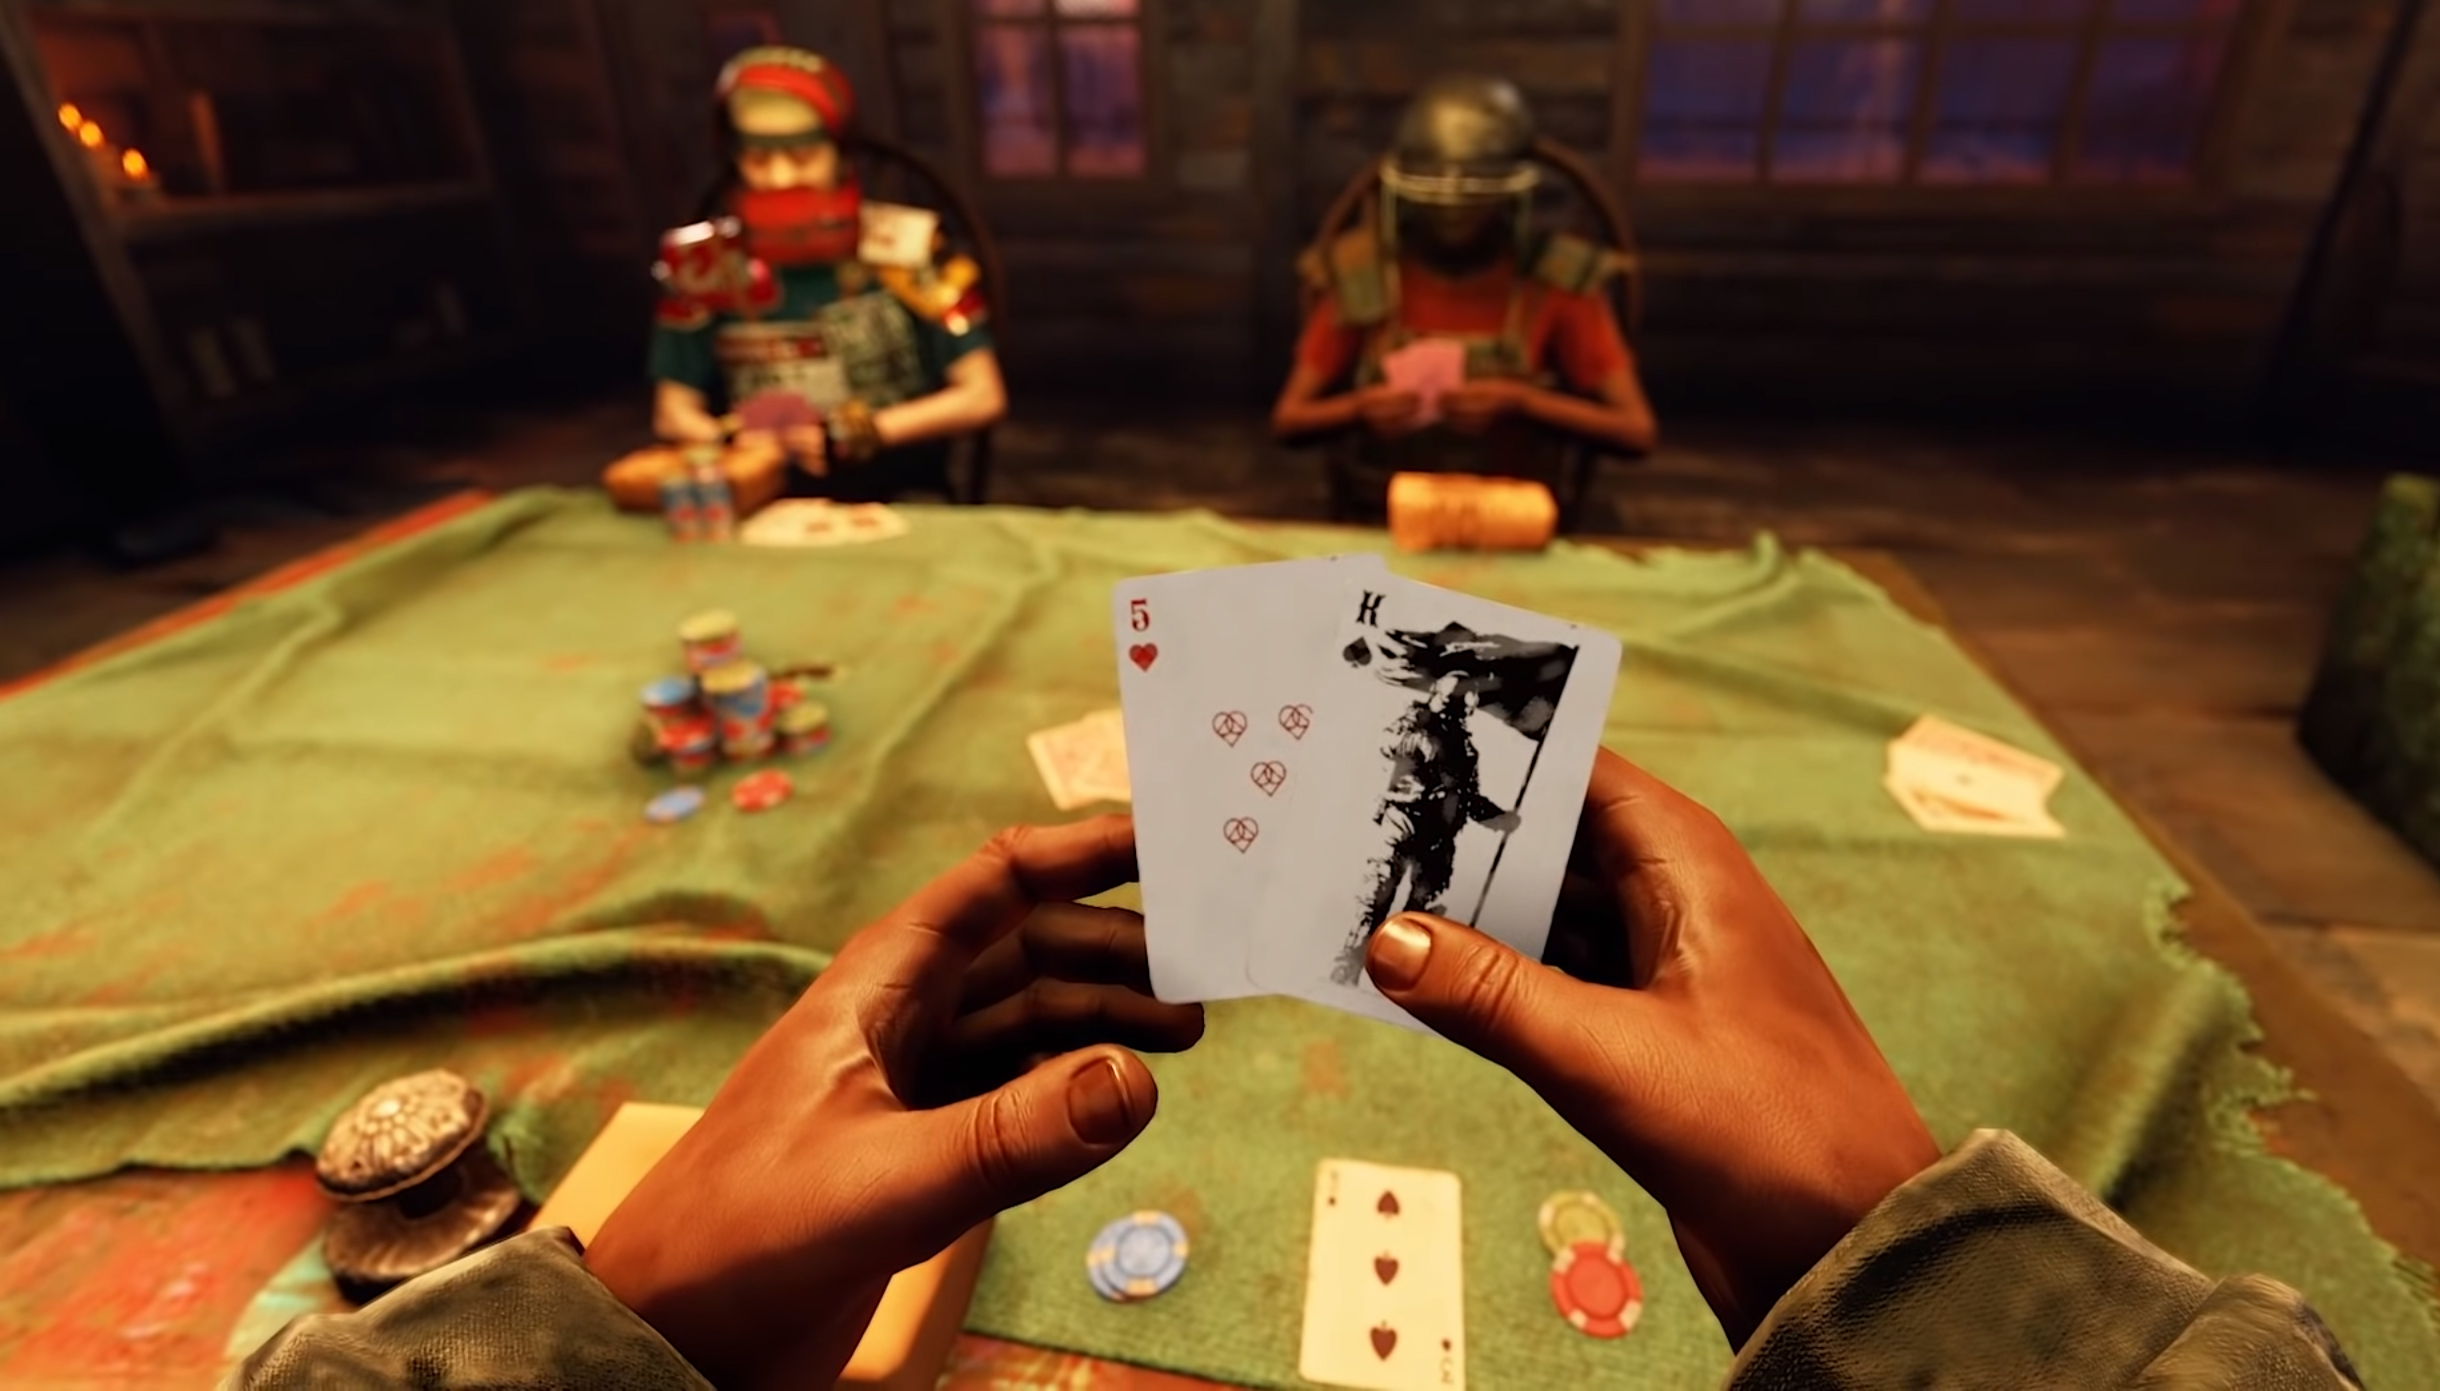  Lose all your scrap at Rust's new poker tables 